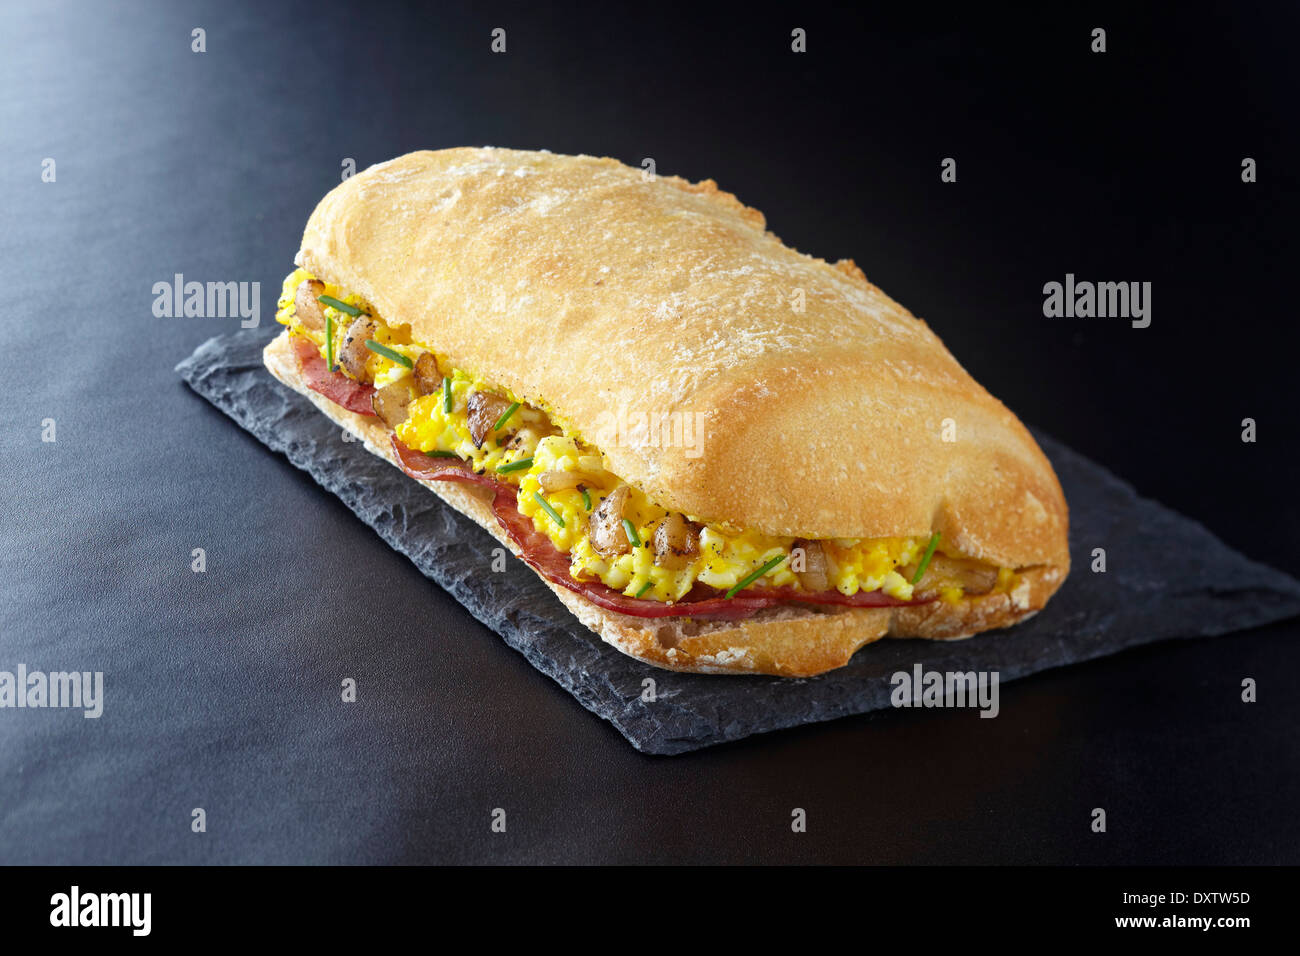 Egg mimosa,bacon,onion and chive bread sandwich Stock Photo